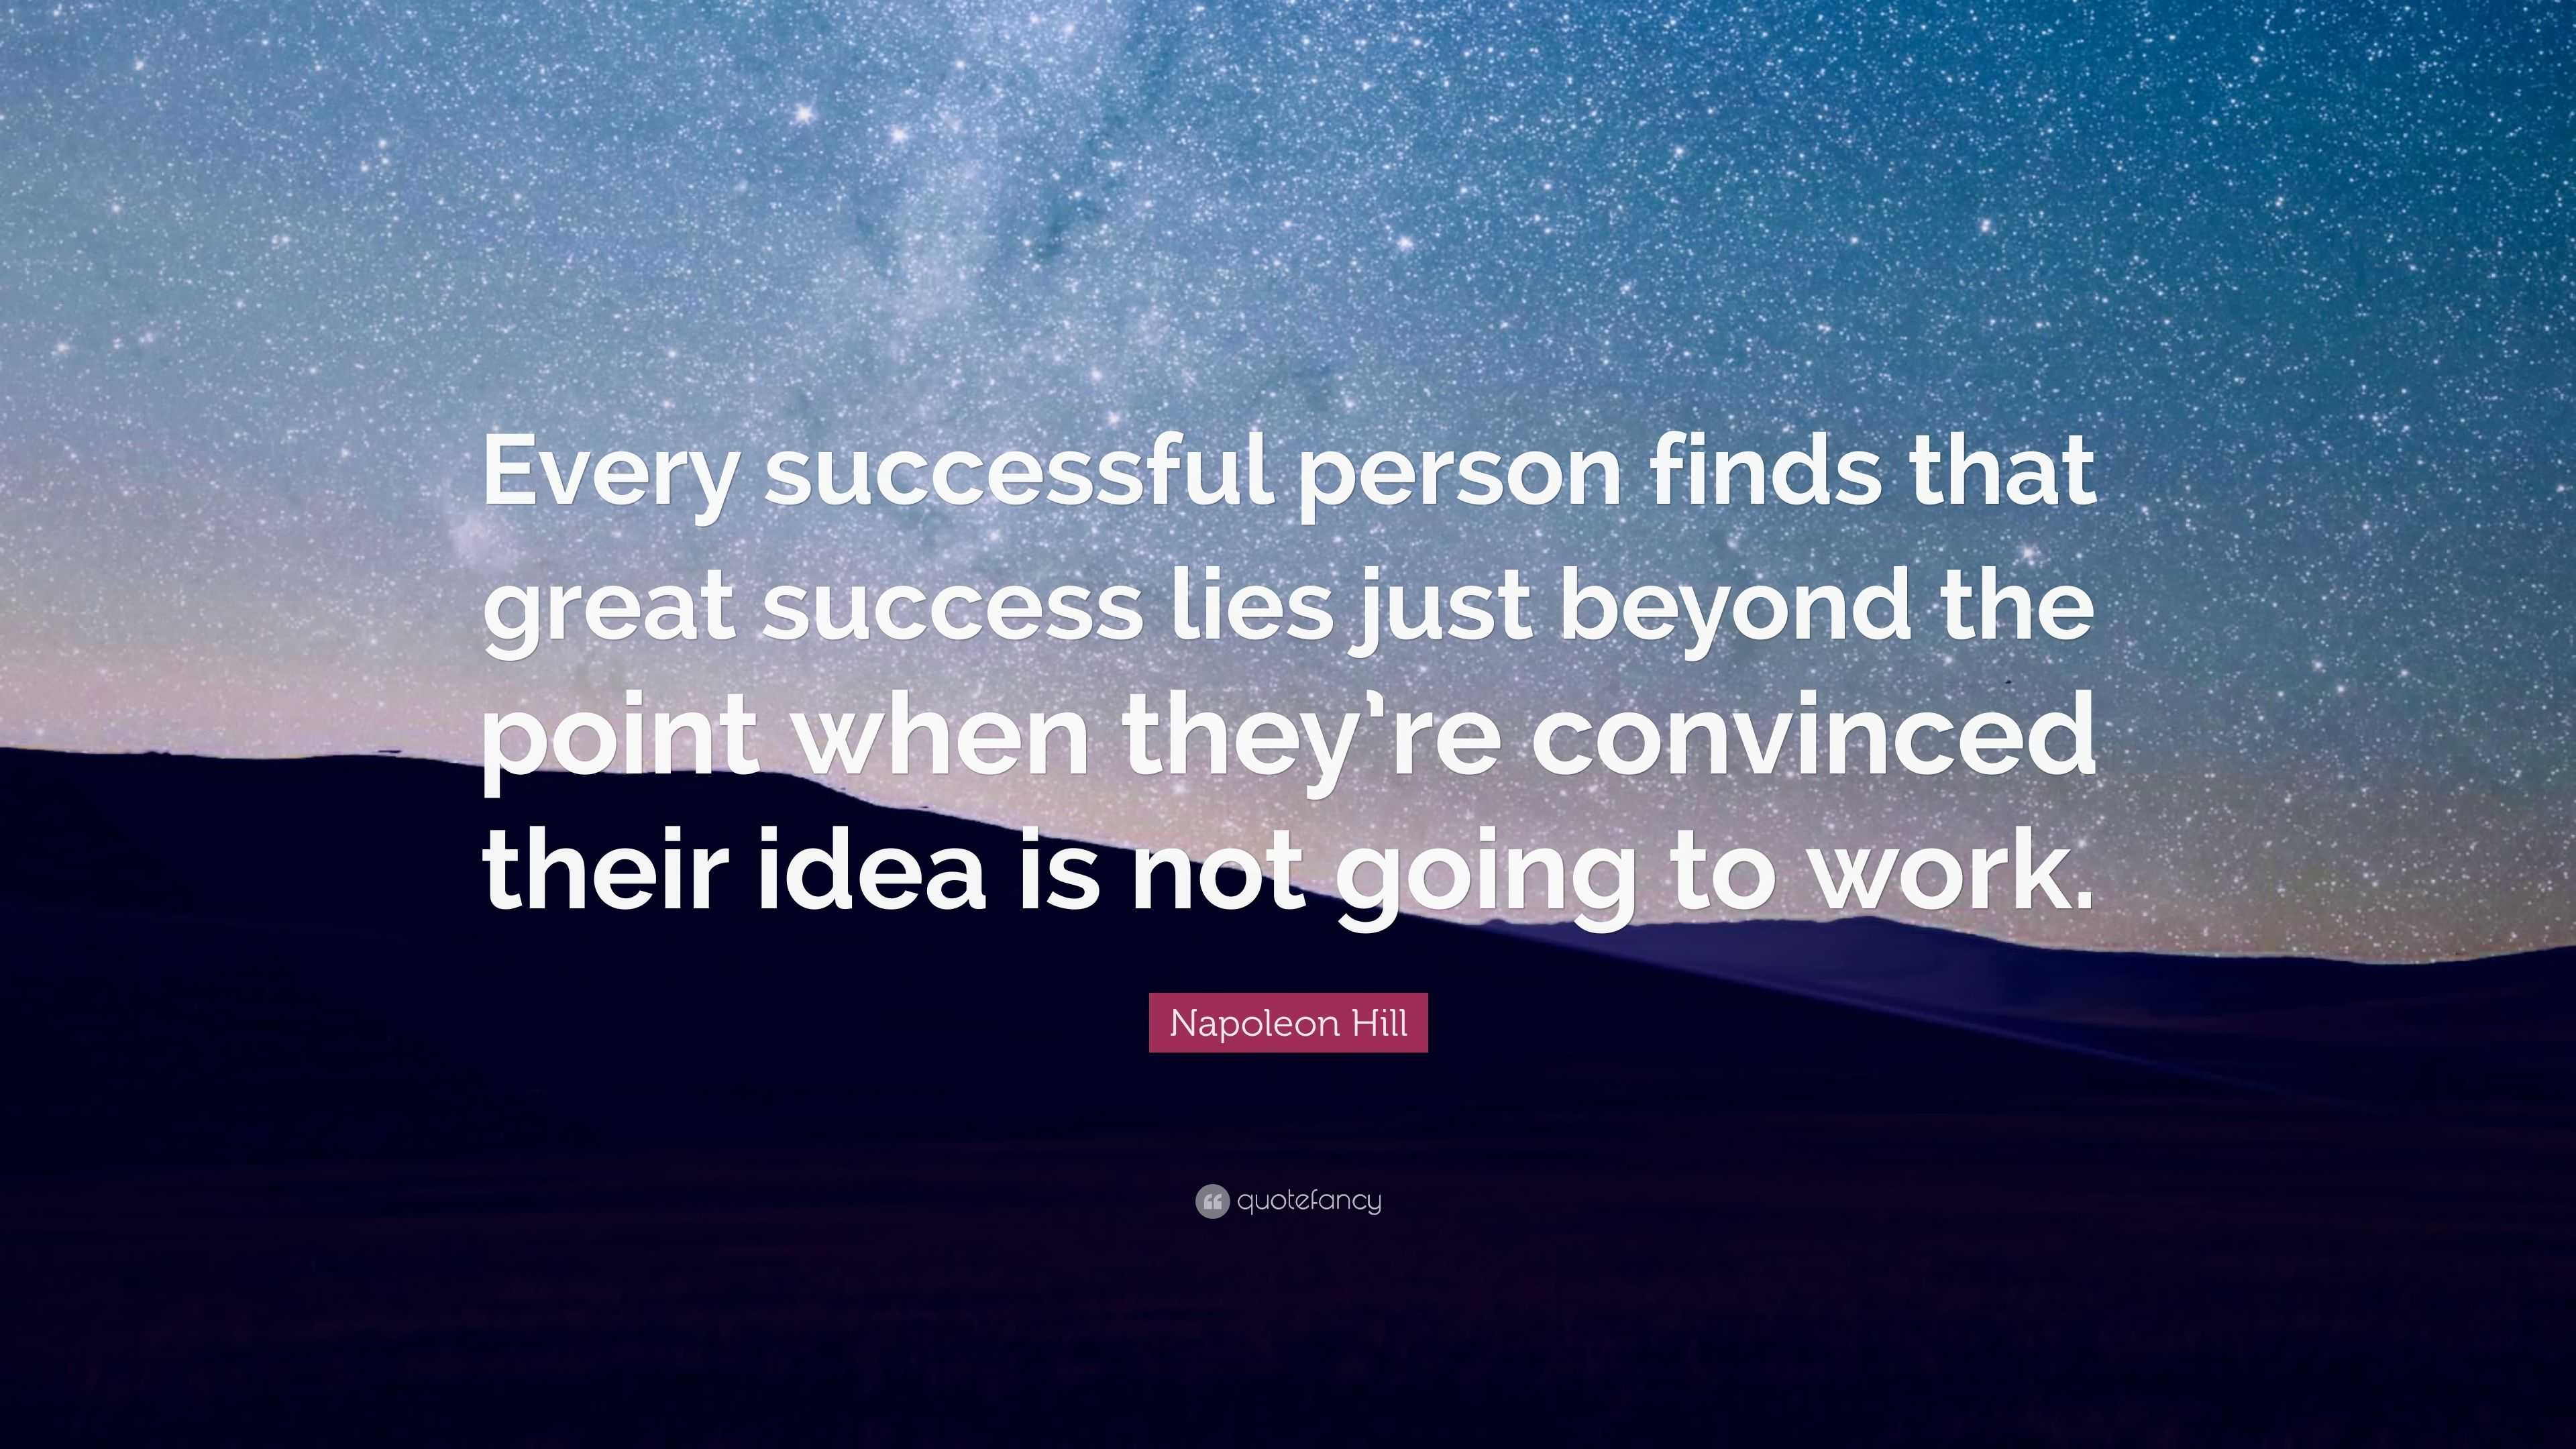 Napoleon Hill Quote: “Every successful person finds that great success ...